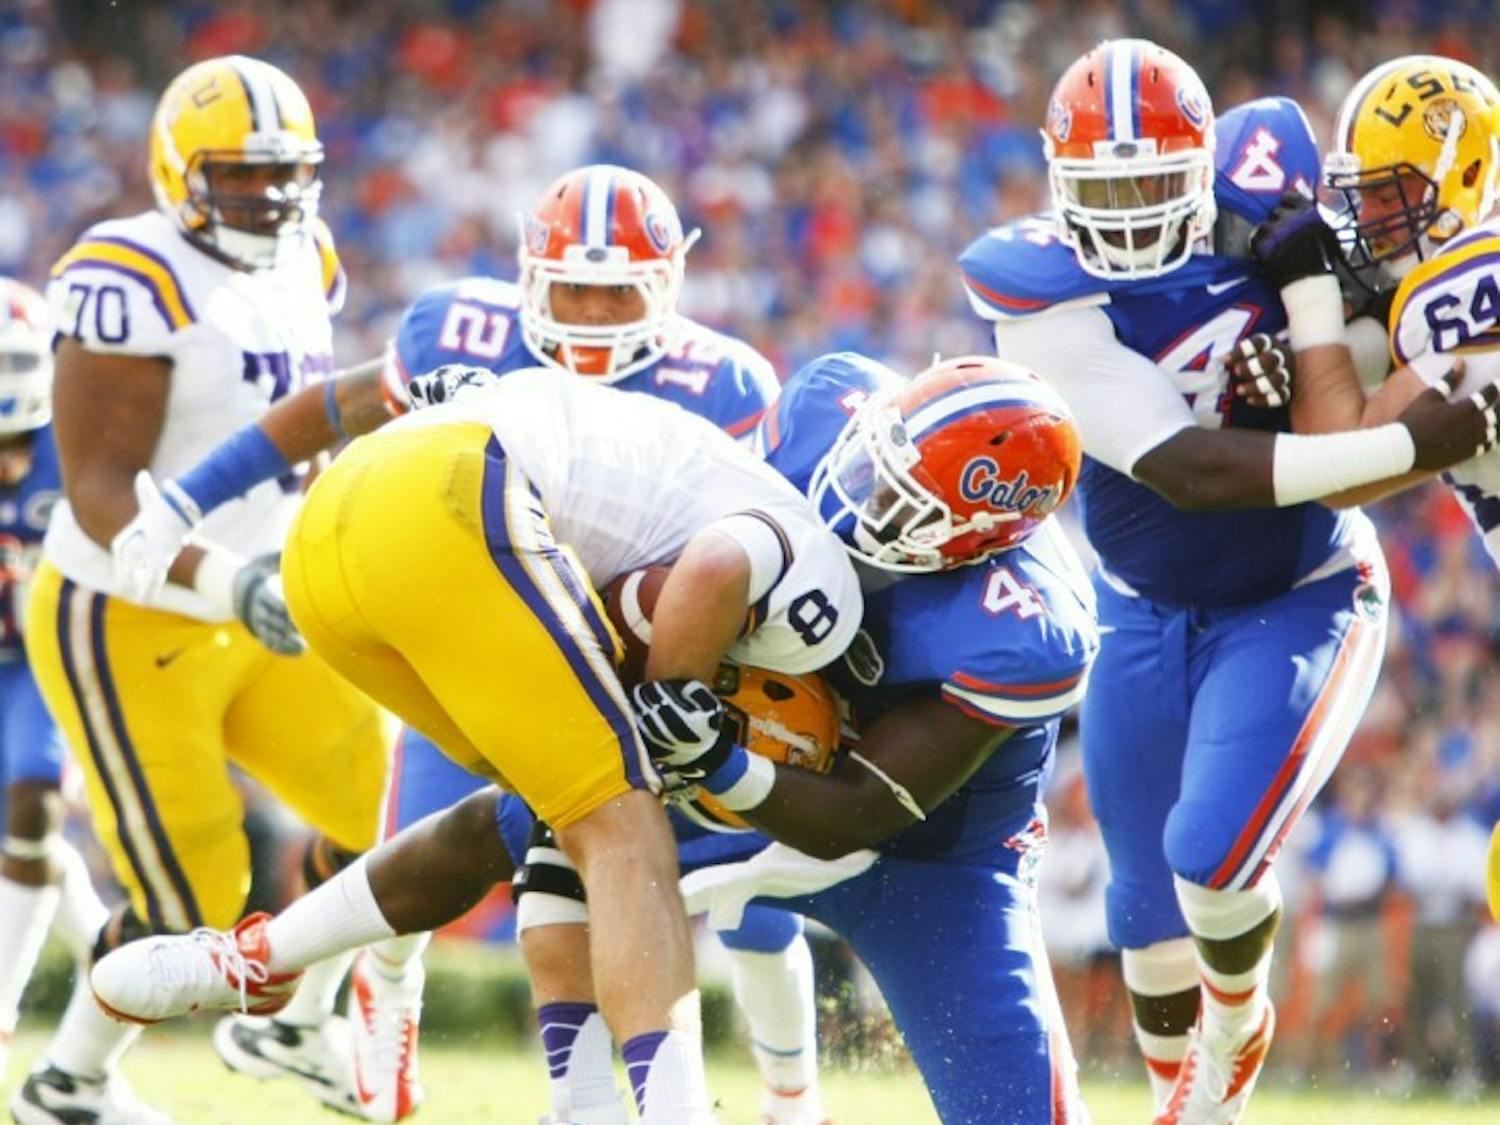 Junior Damien Jacobs (4) sacks LSU quarterback Zach Mettenberger (8) in the second quarter of Florida's 14-6 victory on Saturday in Ben Hill Griffin Stadium. The Gators had a season-high four sacks in the win.